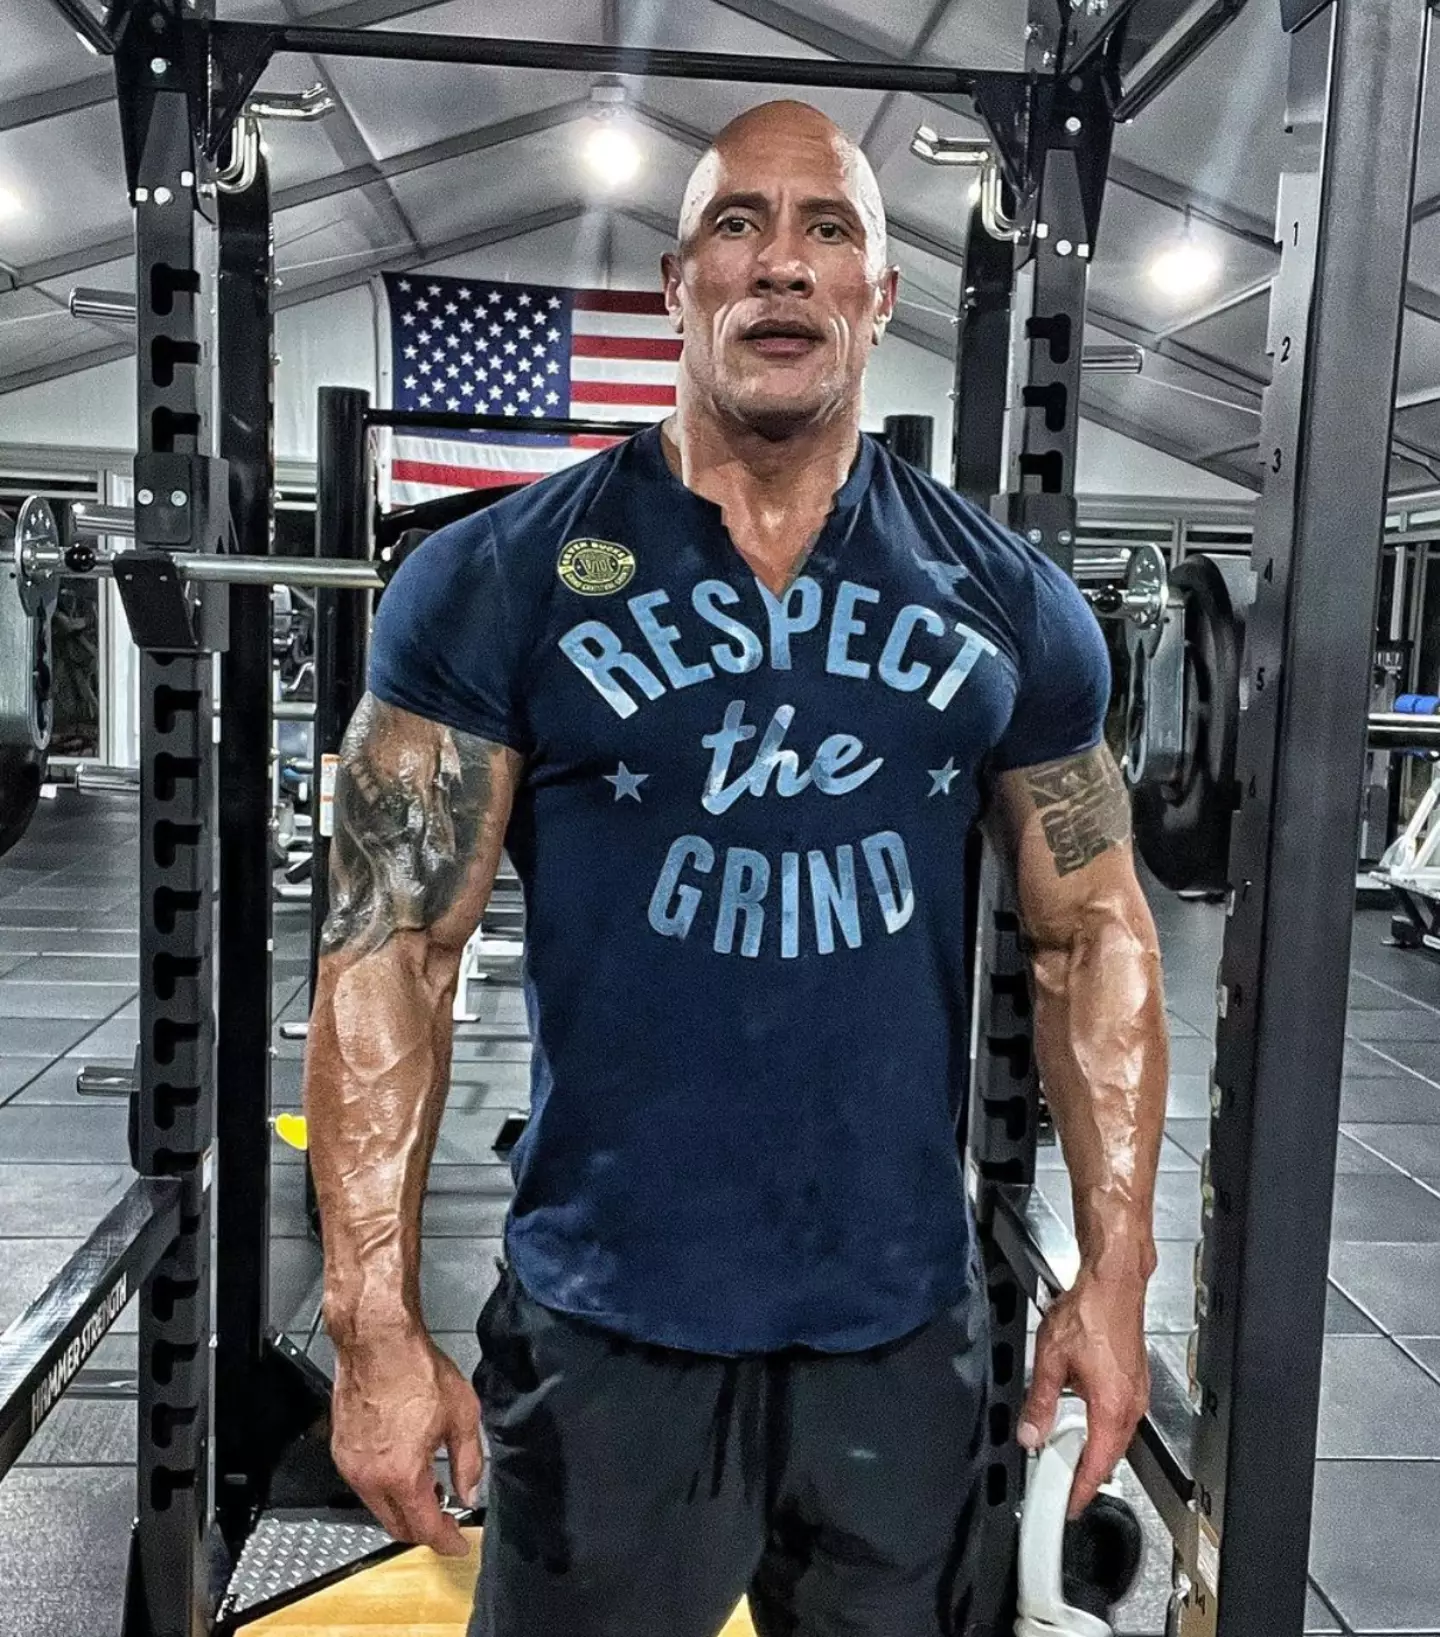 Dwayne Johnson would certainly be a match for Martyn Ford.